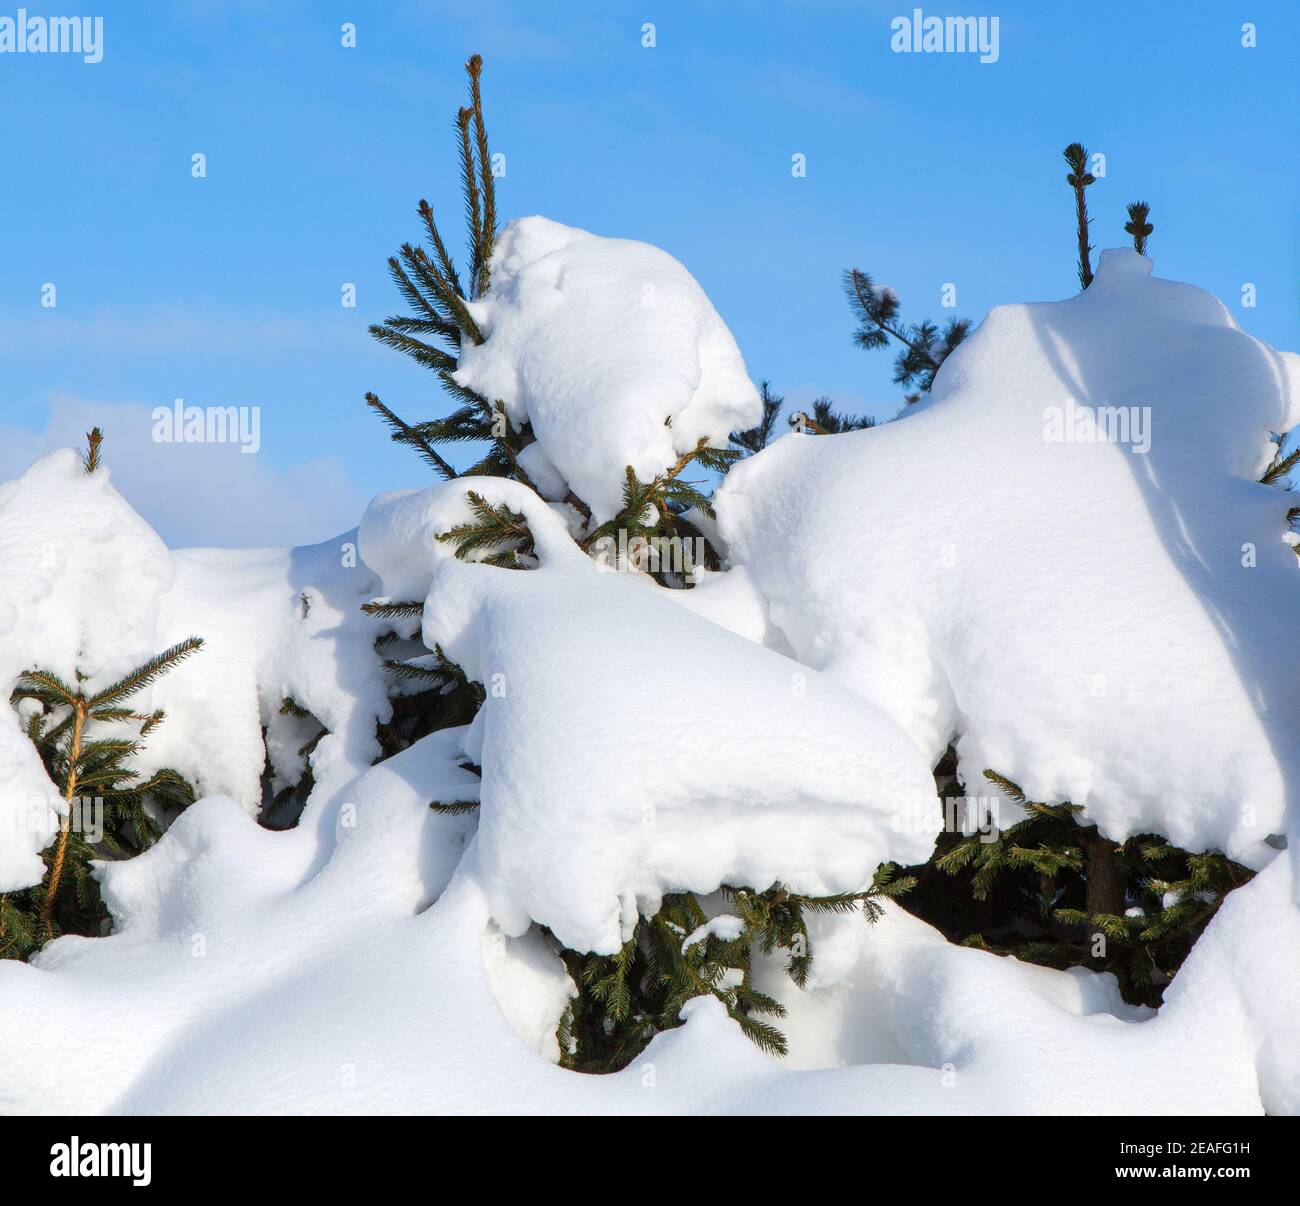 Snow covered spruce trees. Winter landscape on blue sky background. Snow drifts after snowfall and storm. Nature as Background. Stock Photo